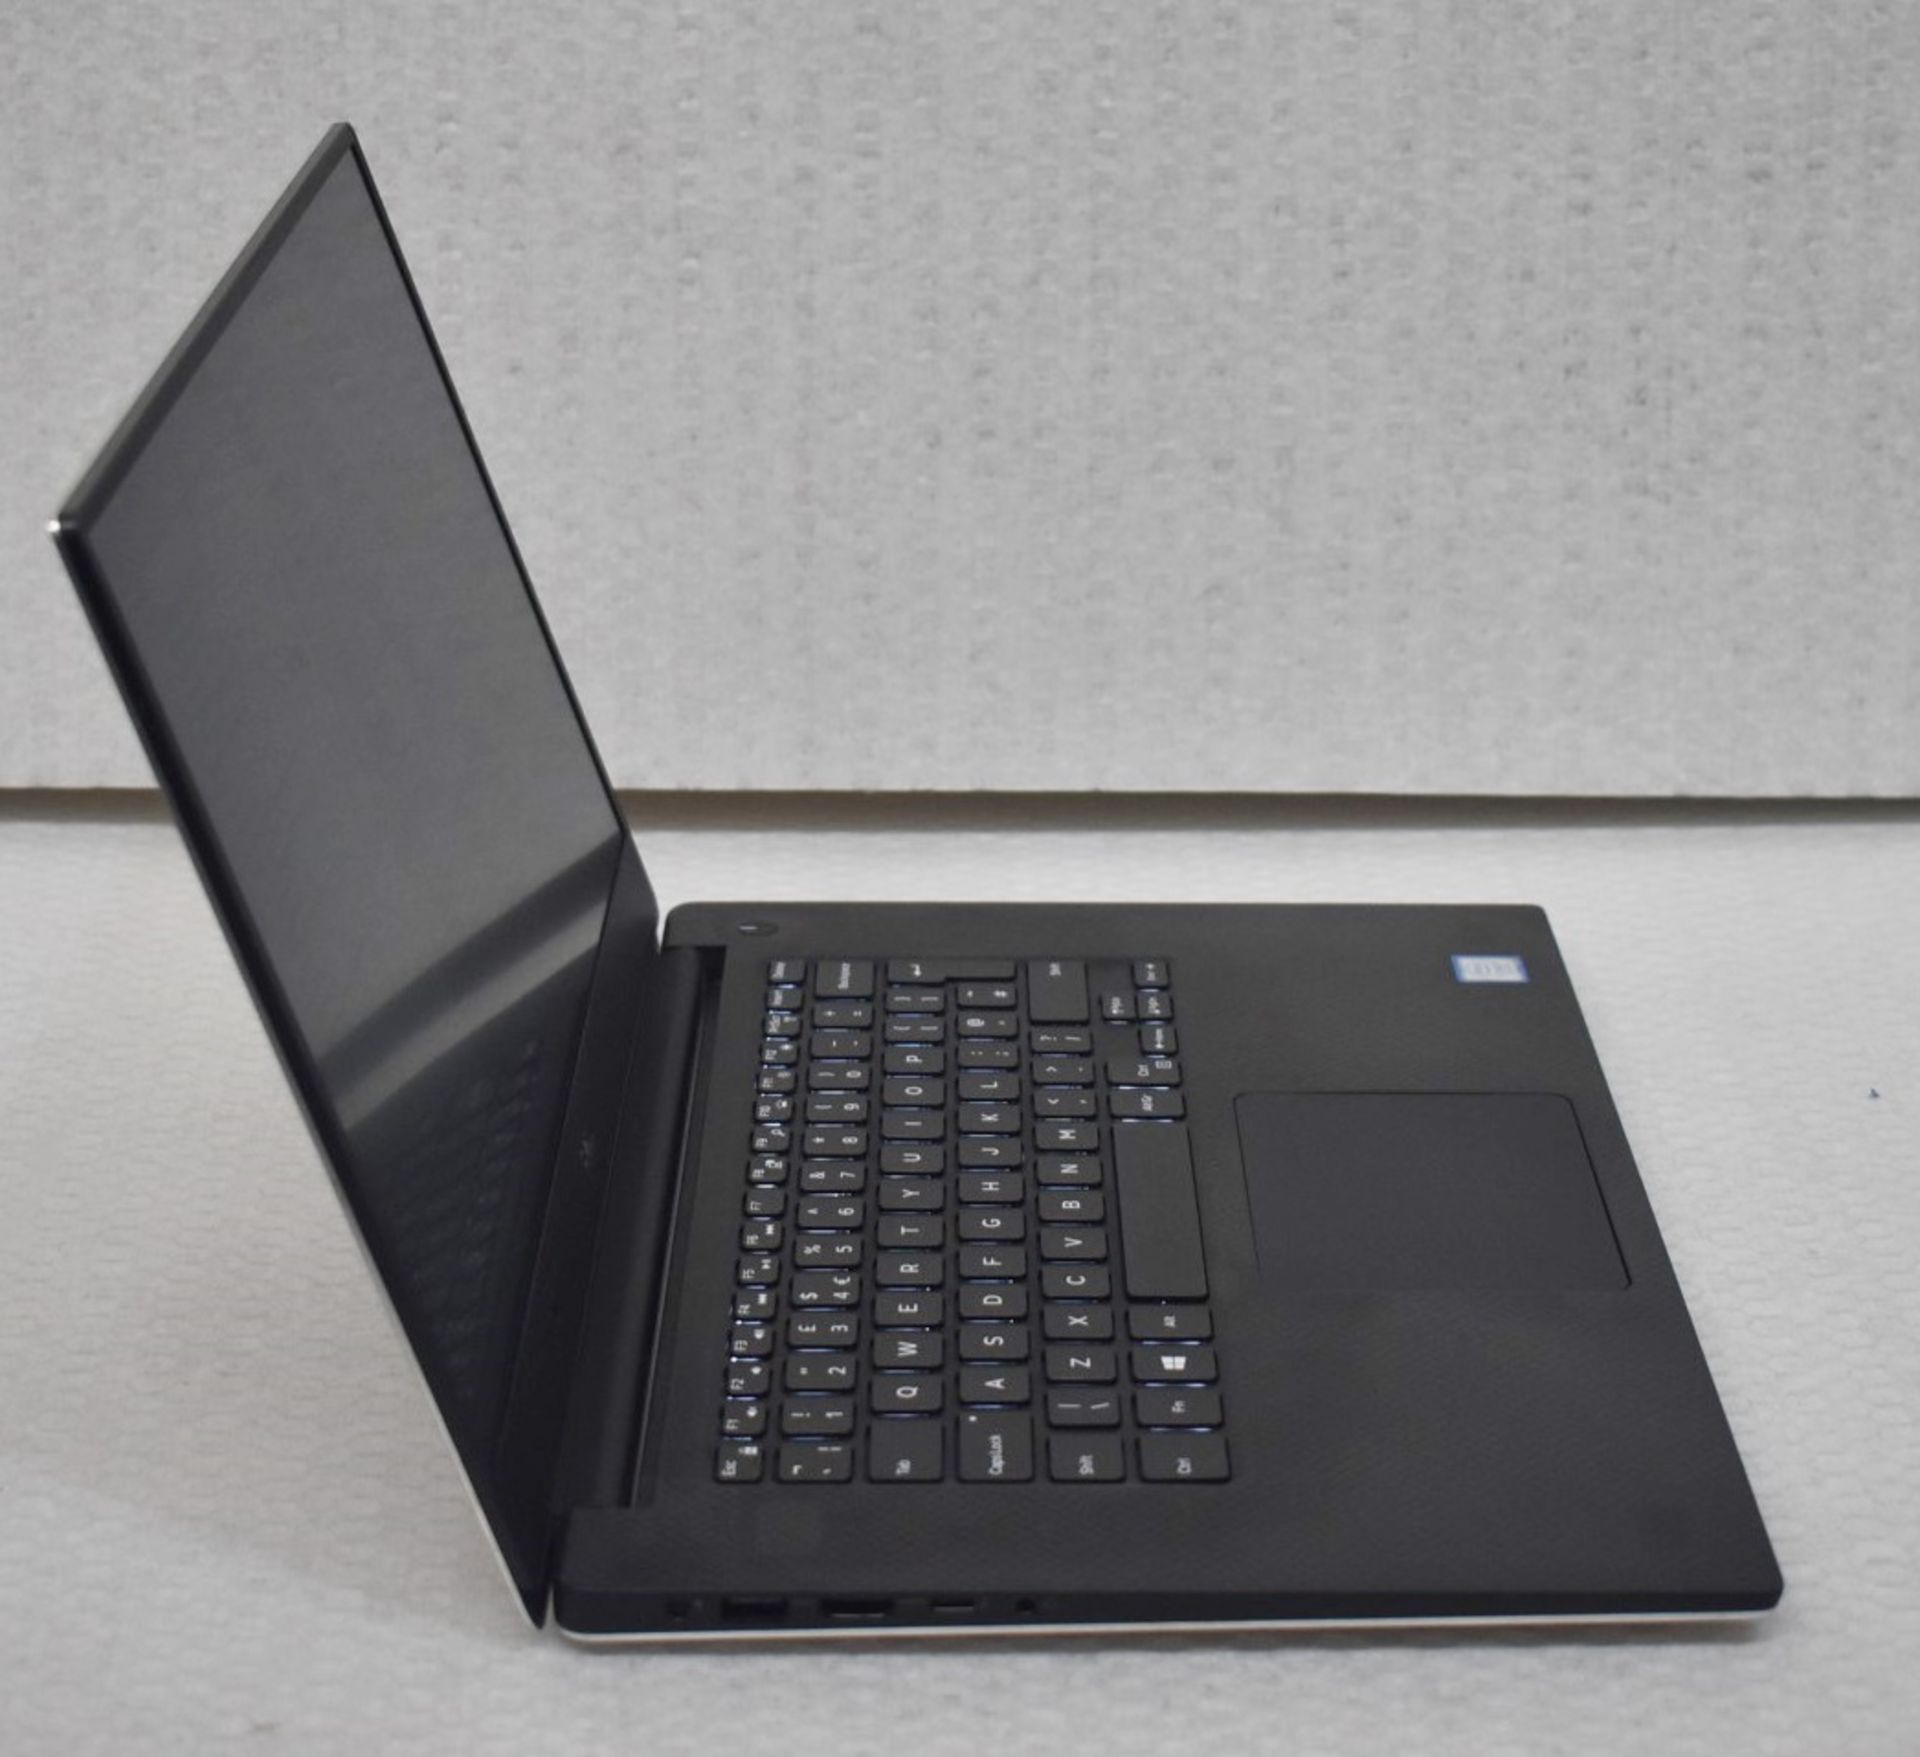 1 x Dell XPS 15 9570 15.6" Full HD Laptop Featuring an Intel i7-7700hq 3.8ghz Quad Core Processor, - Image 6 of 17